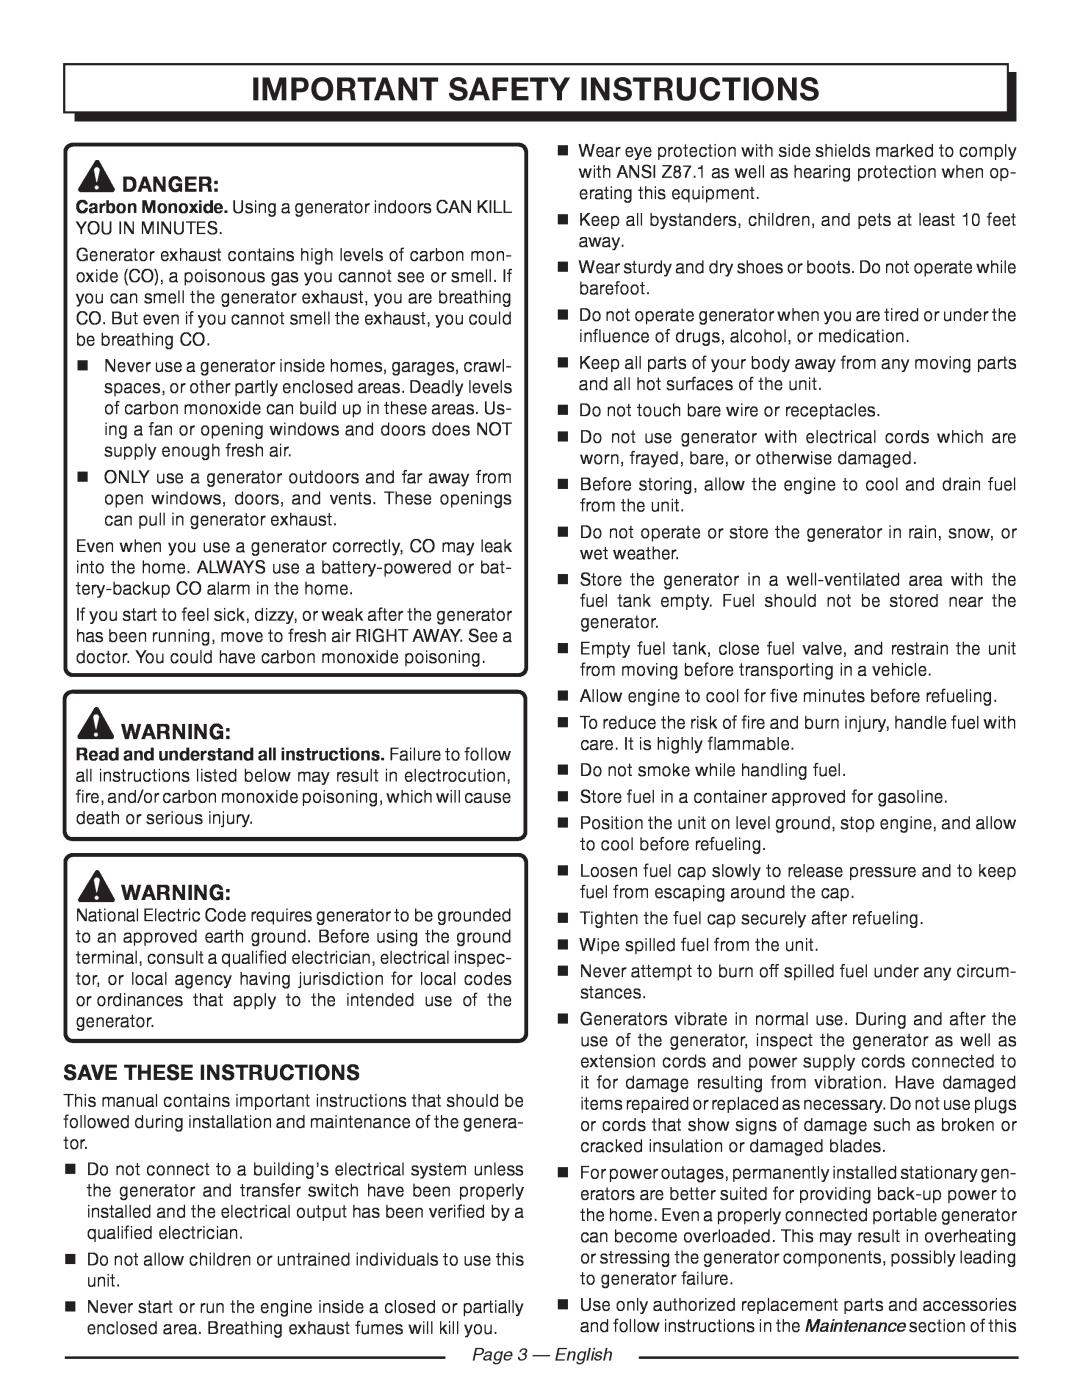 Homelite HGCA1400 manuel dutilisation important safety instructions, Danger, Save These Instructions, Page 3 - English 